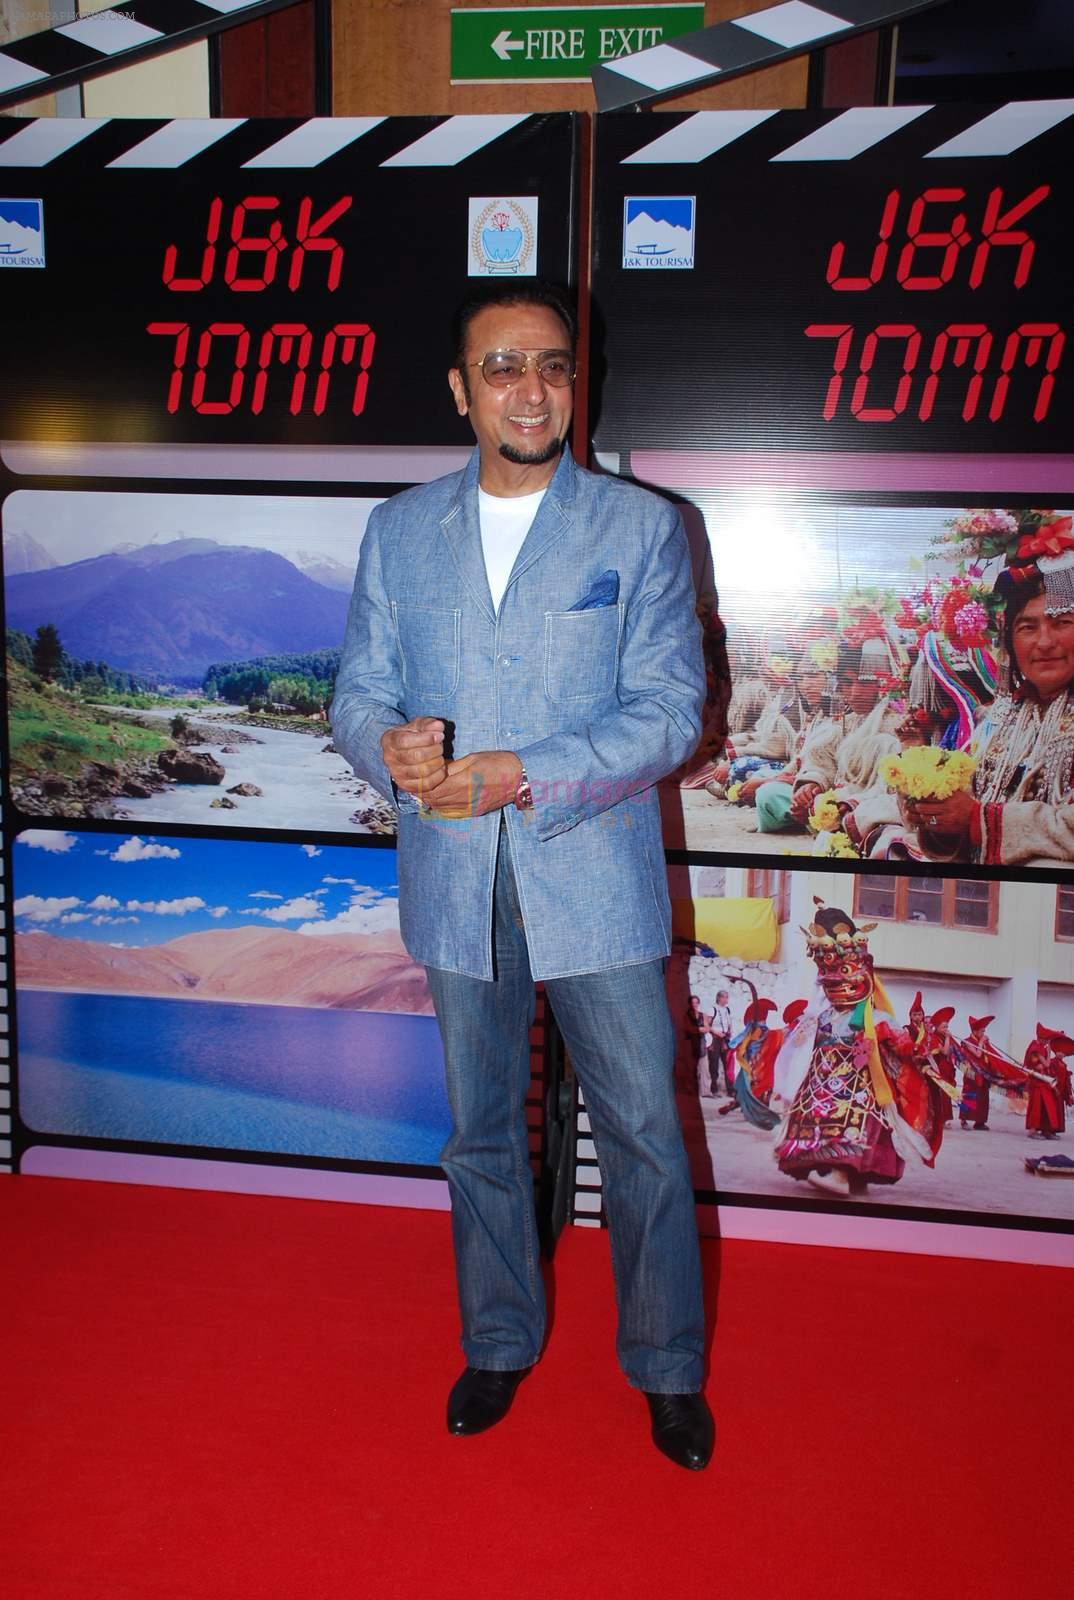 Gulshan Grover at J & K bash to invite Bollywood to Kashmir in Taj Lands End on 30th April 2015